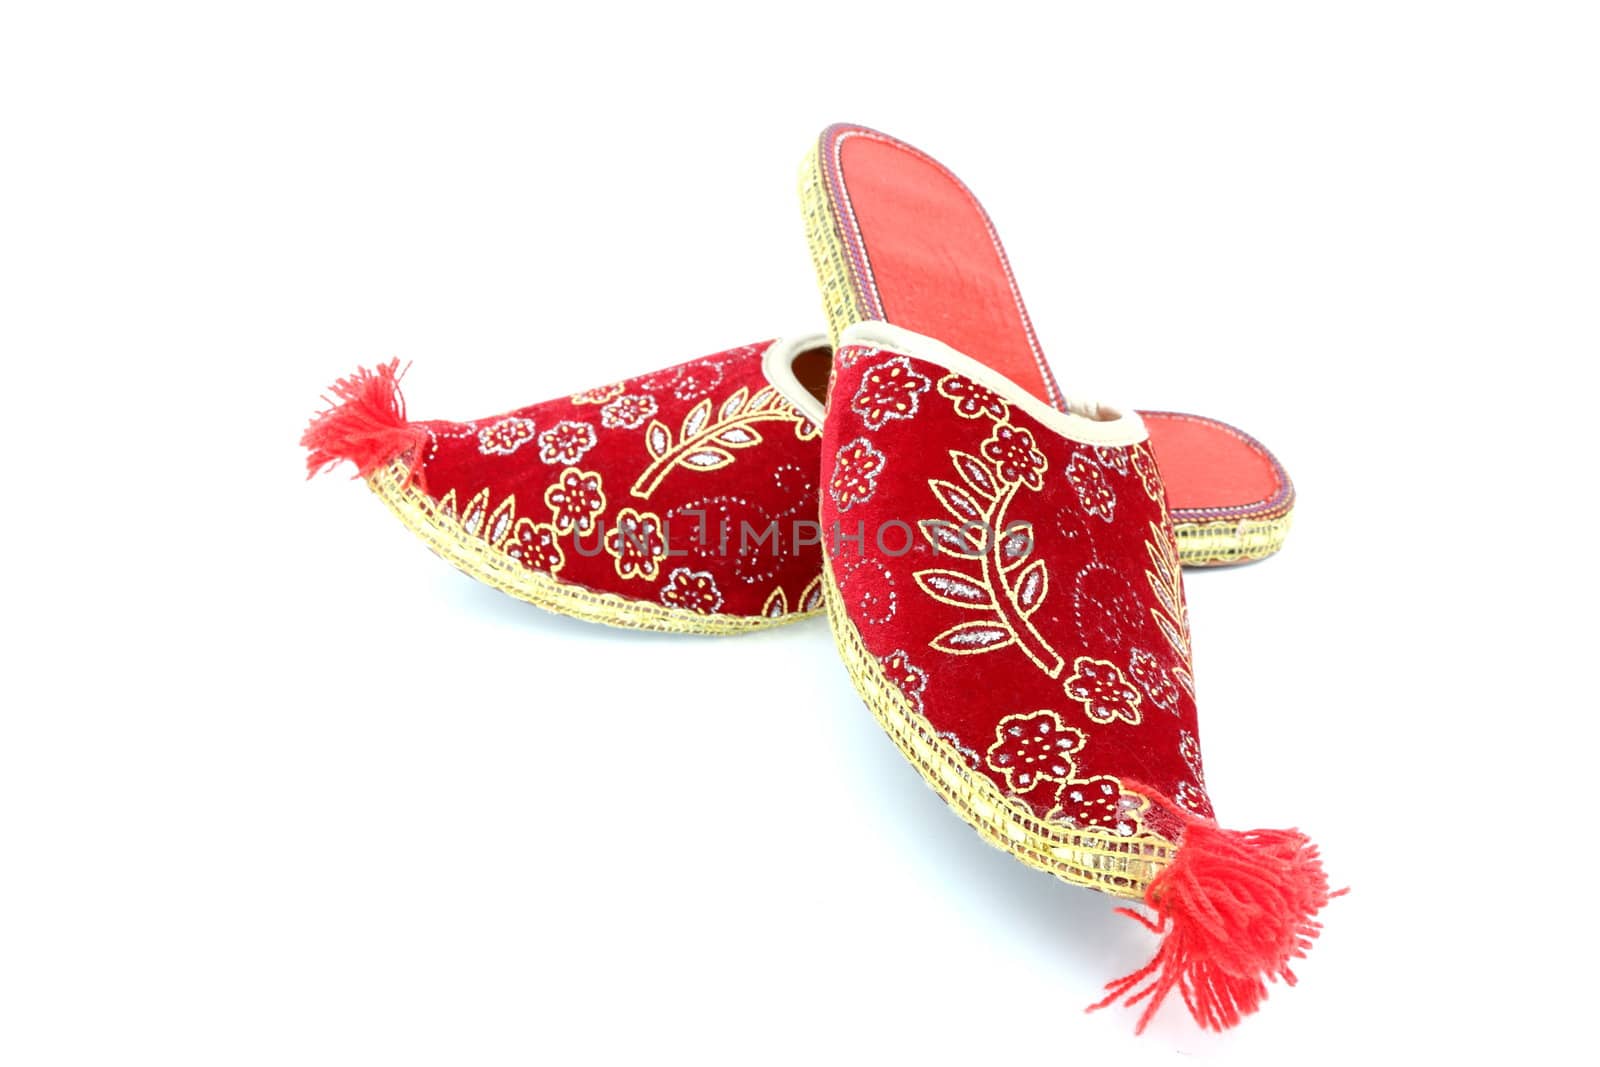 red turkish shoes over white background